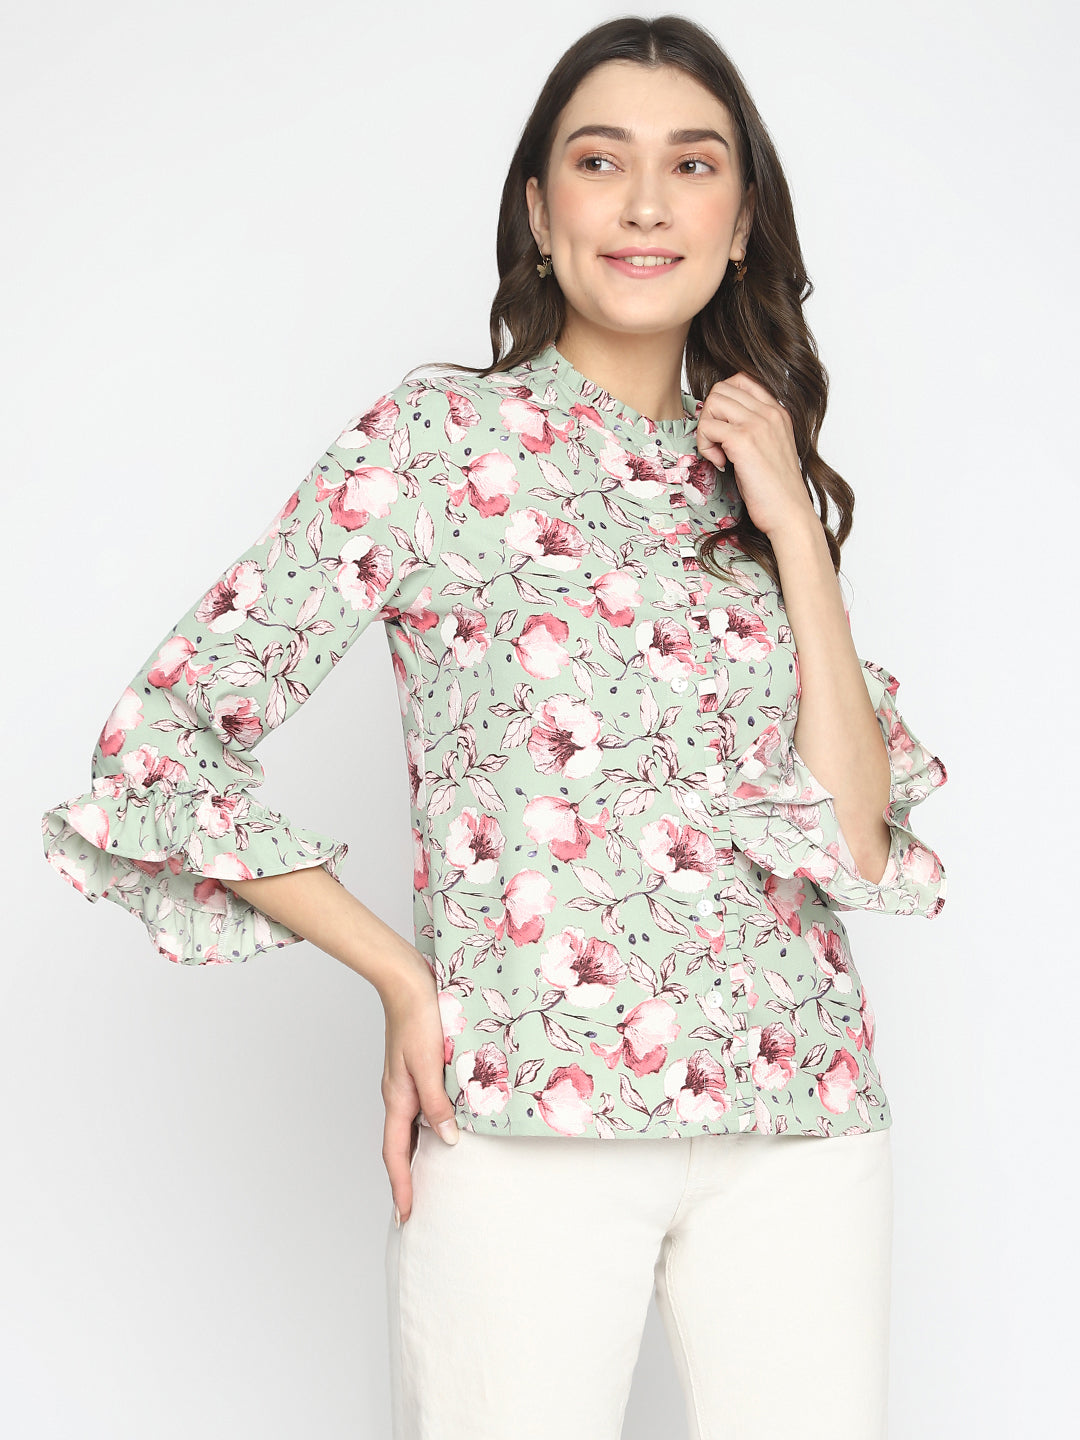 Green 3/4 Sleeve Printed Regular Blouse With Ruffles